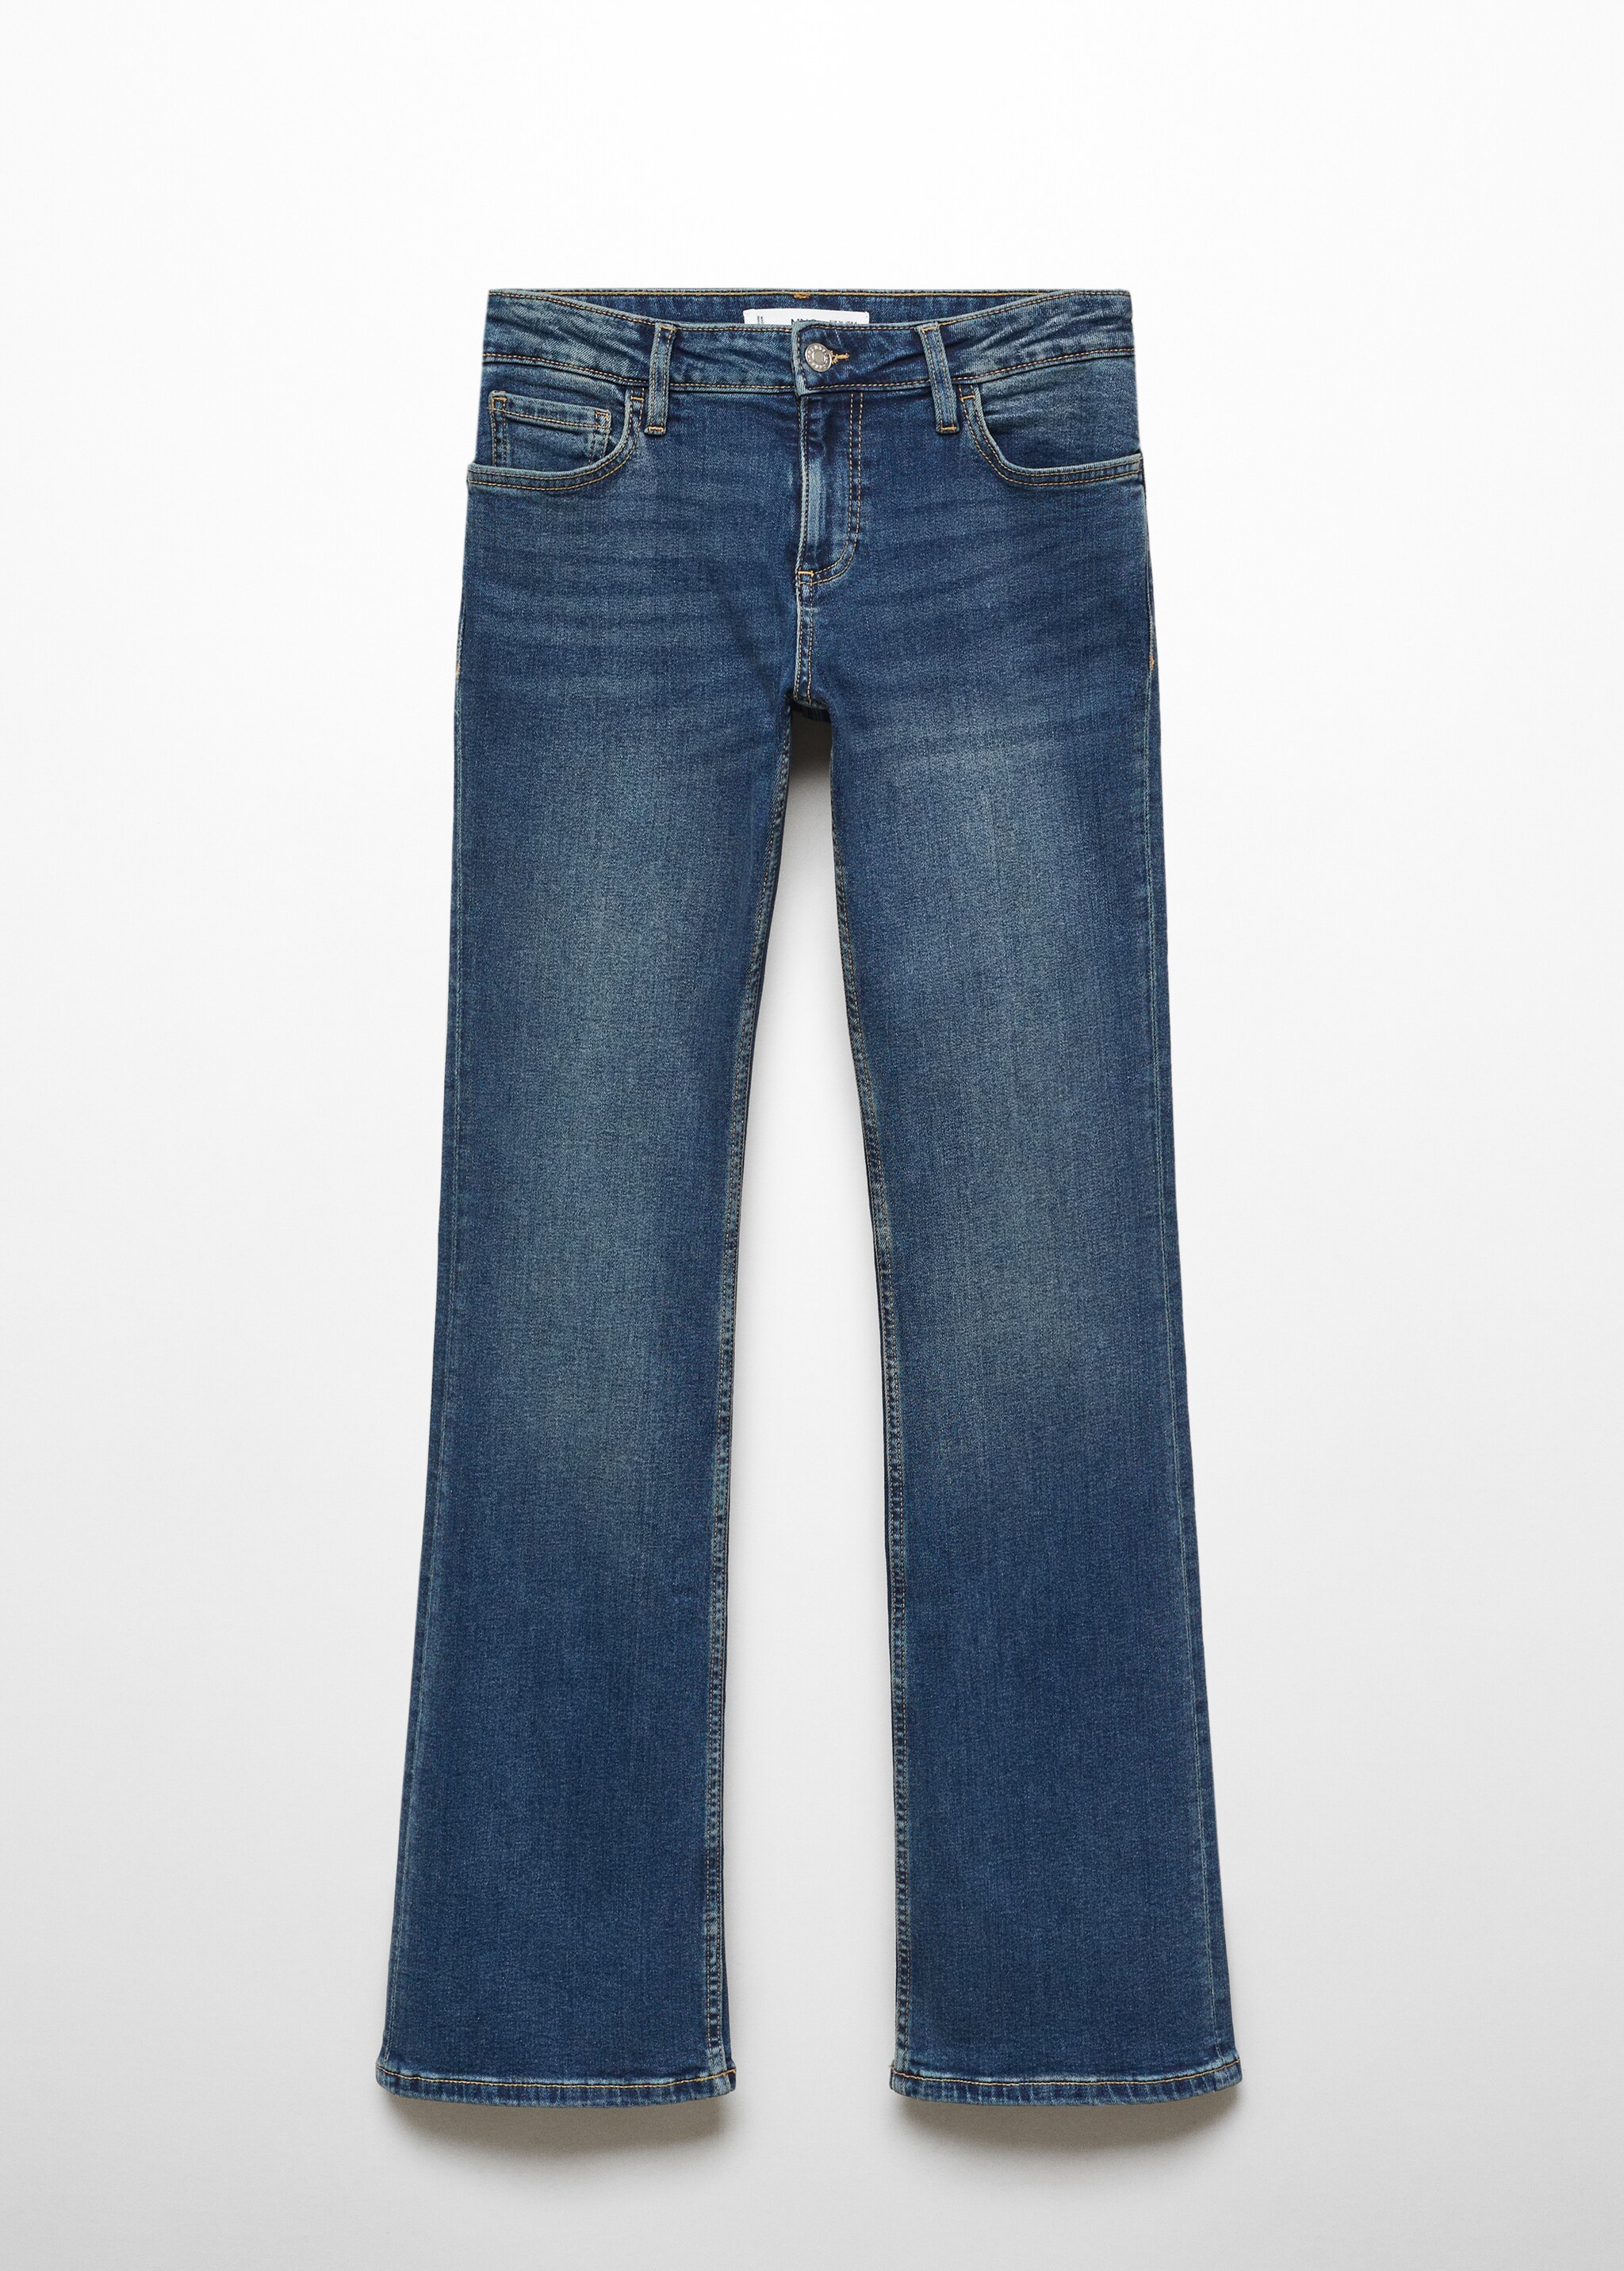 Jeans flare taille basse - Article without model